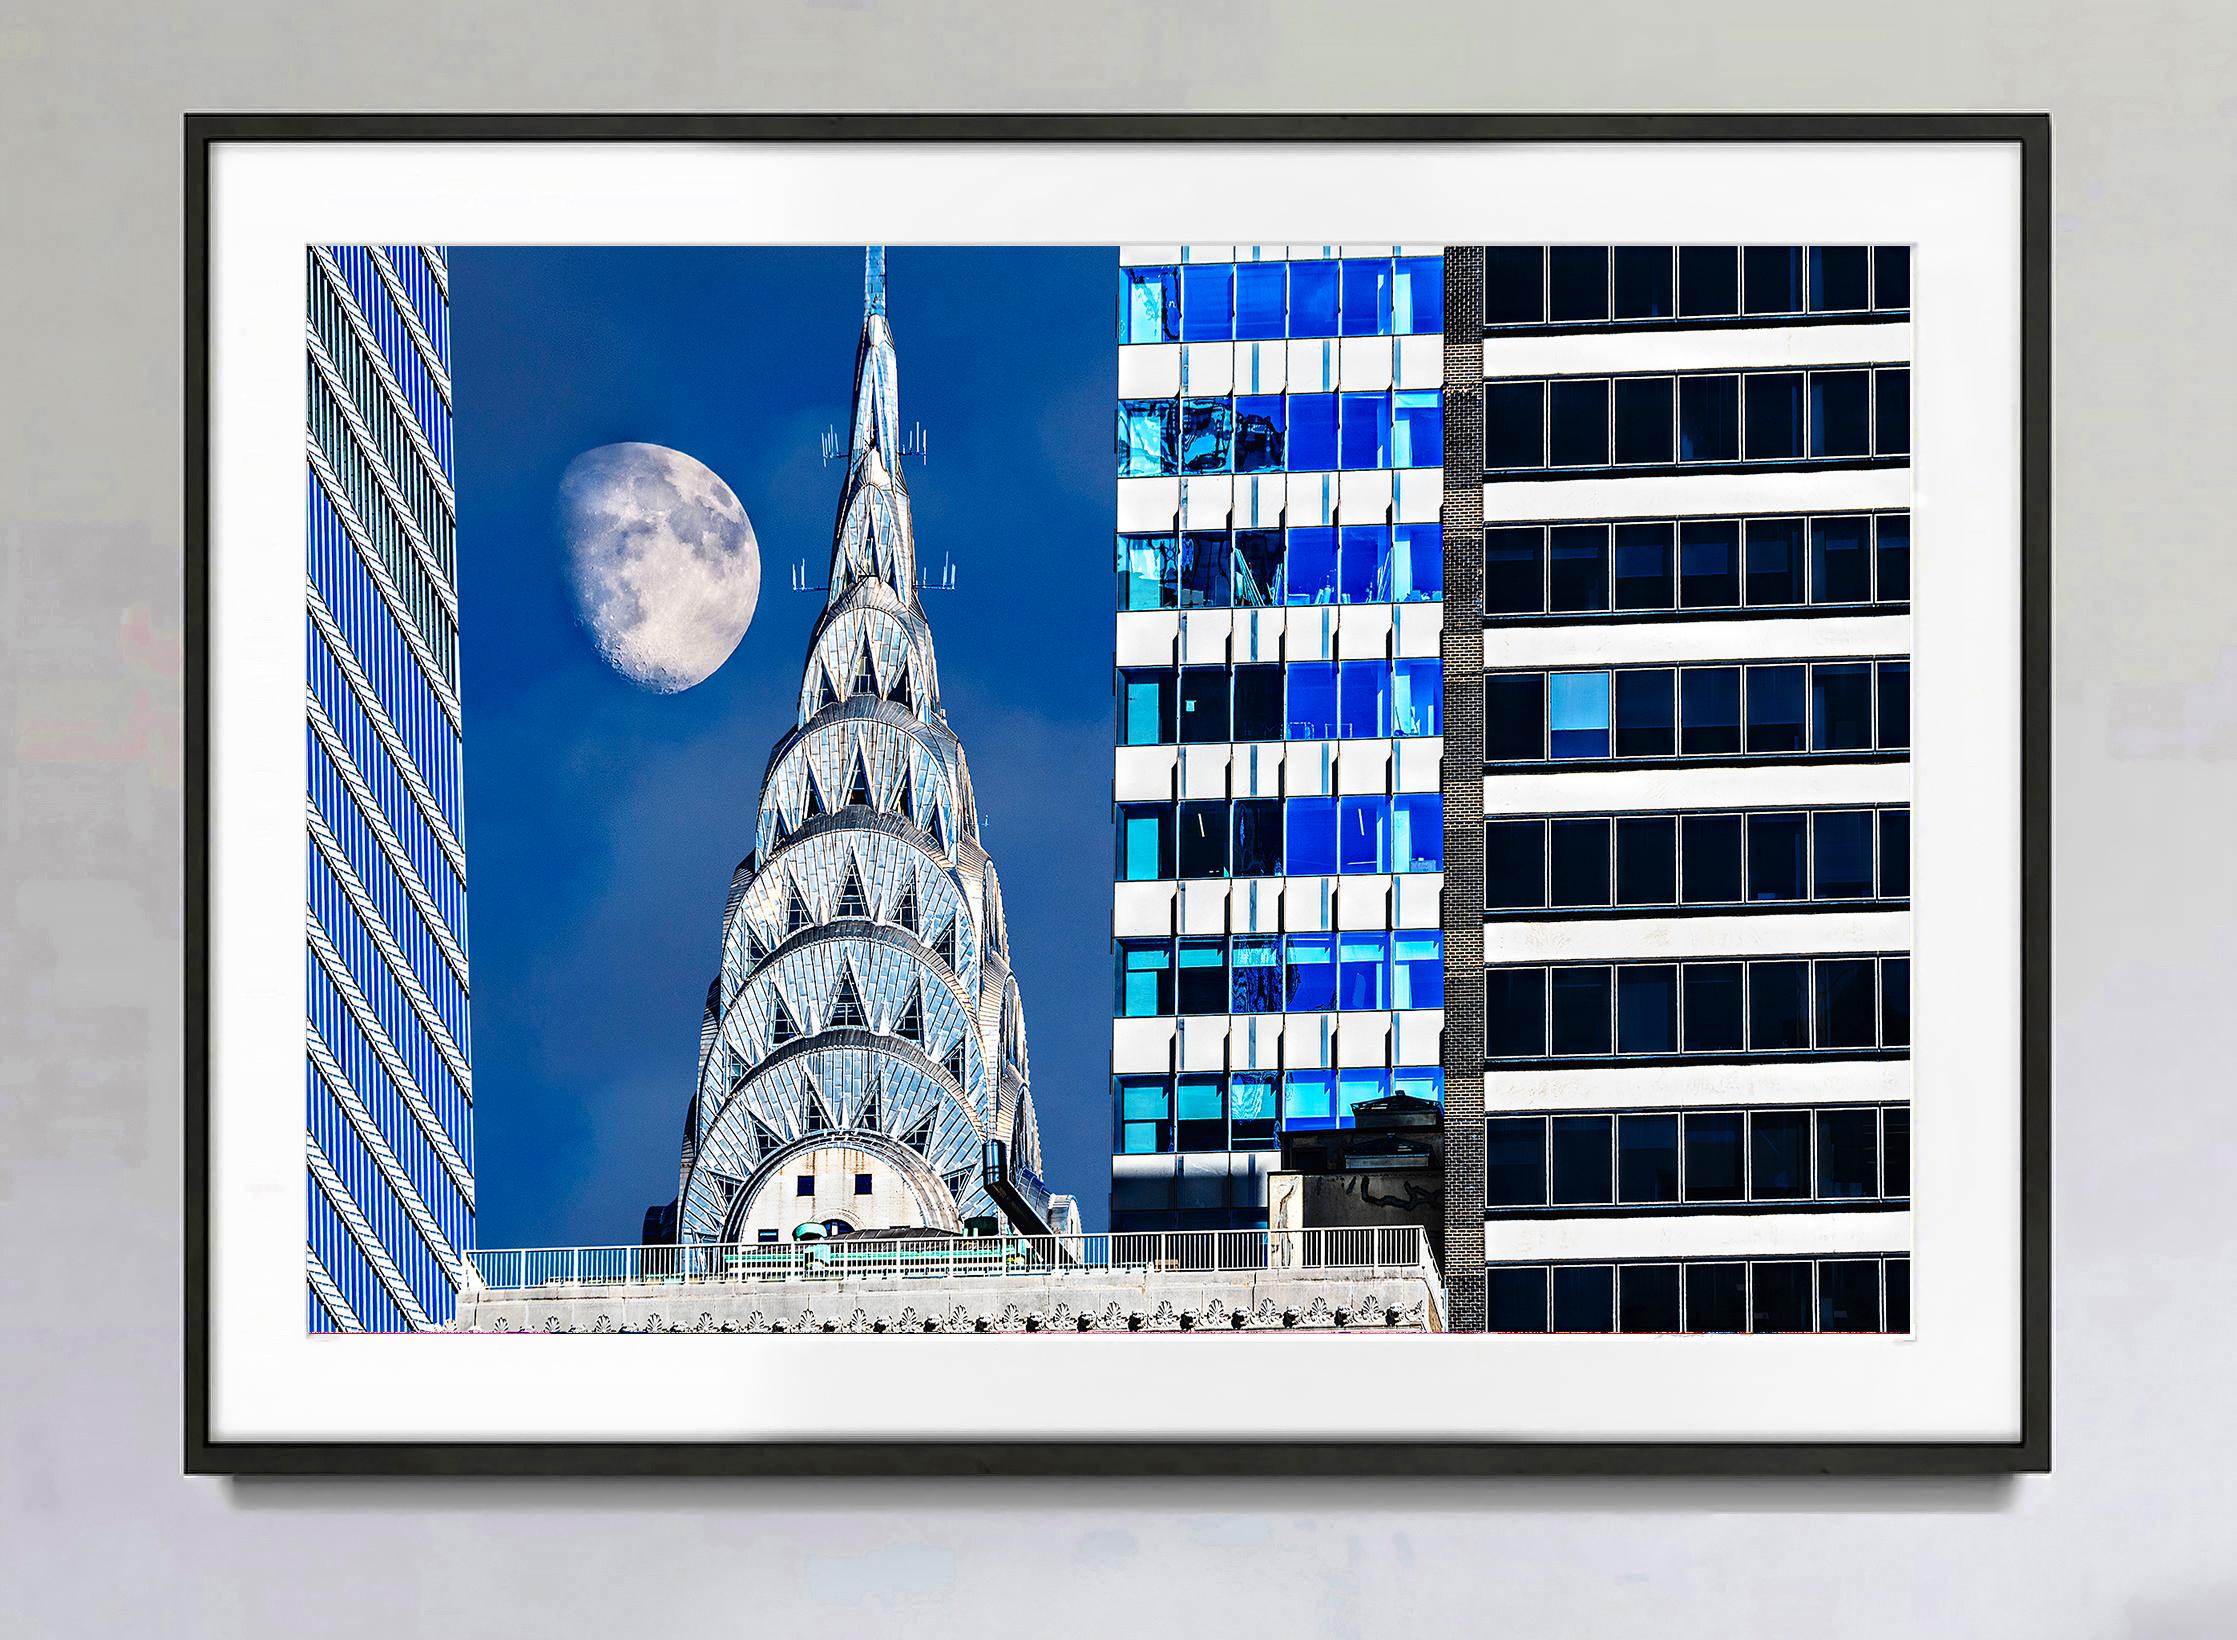 Chrysler Building Spire with Moon   - Art Deco skyscraper - Abstract Geometric Photograph by Mitchell Funk